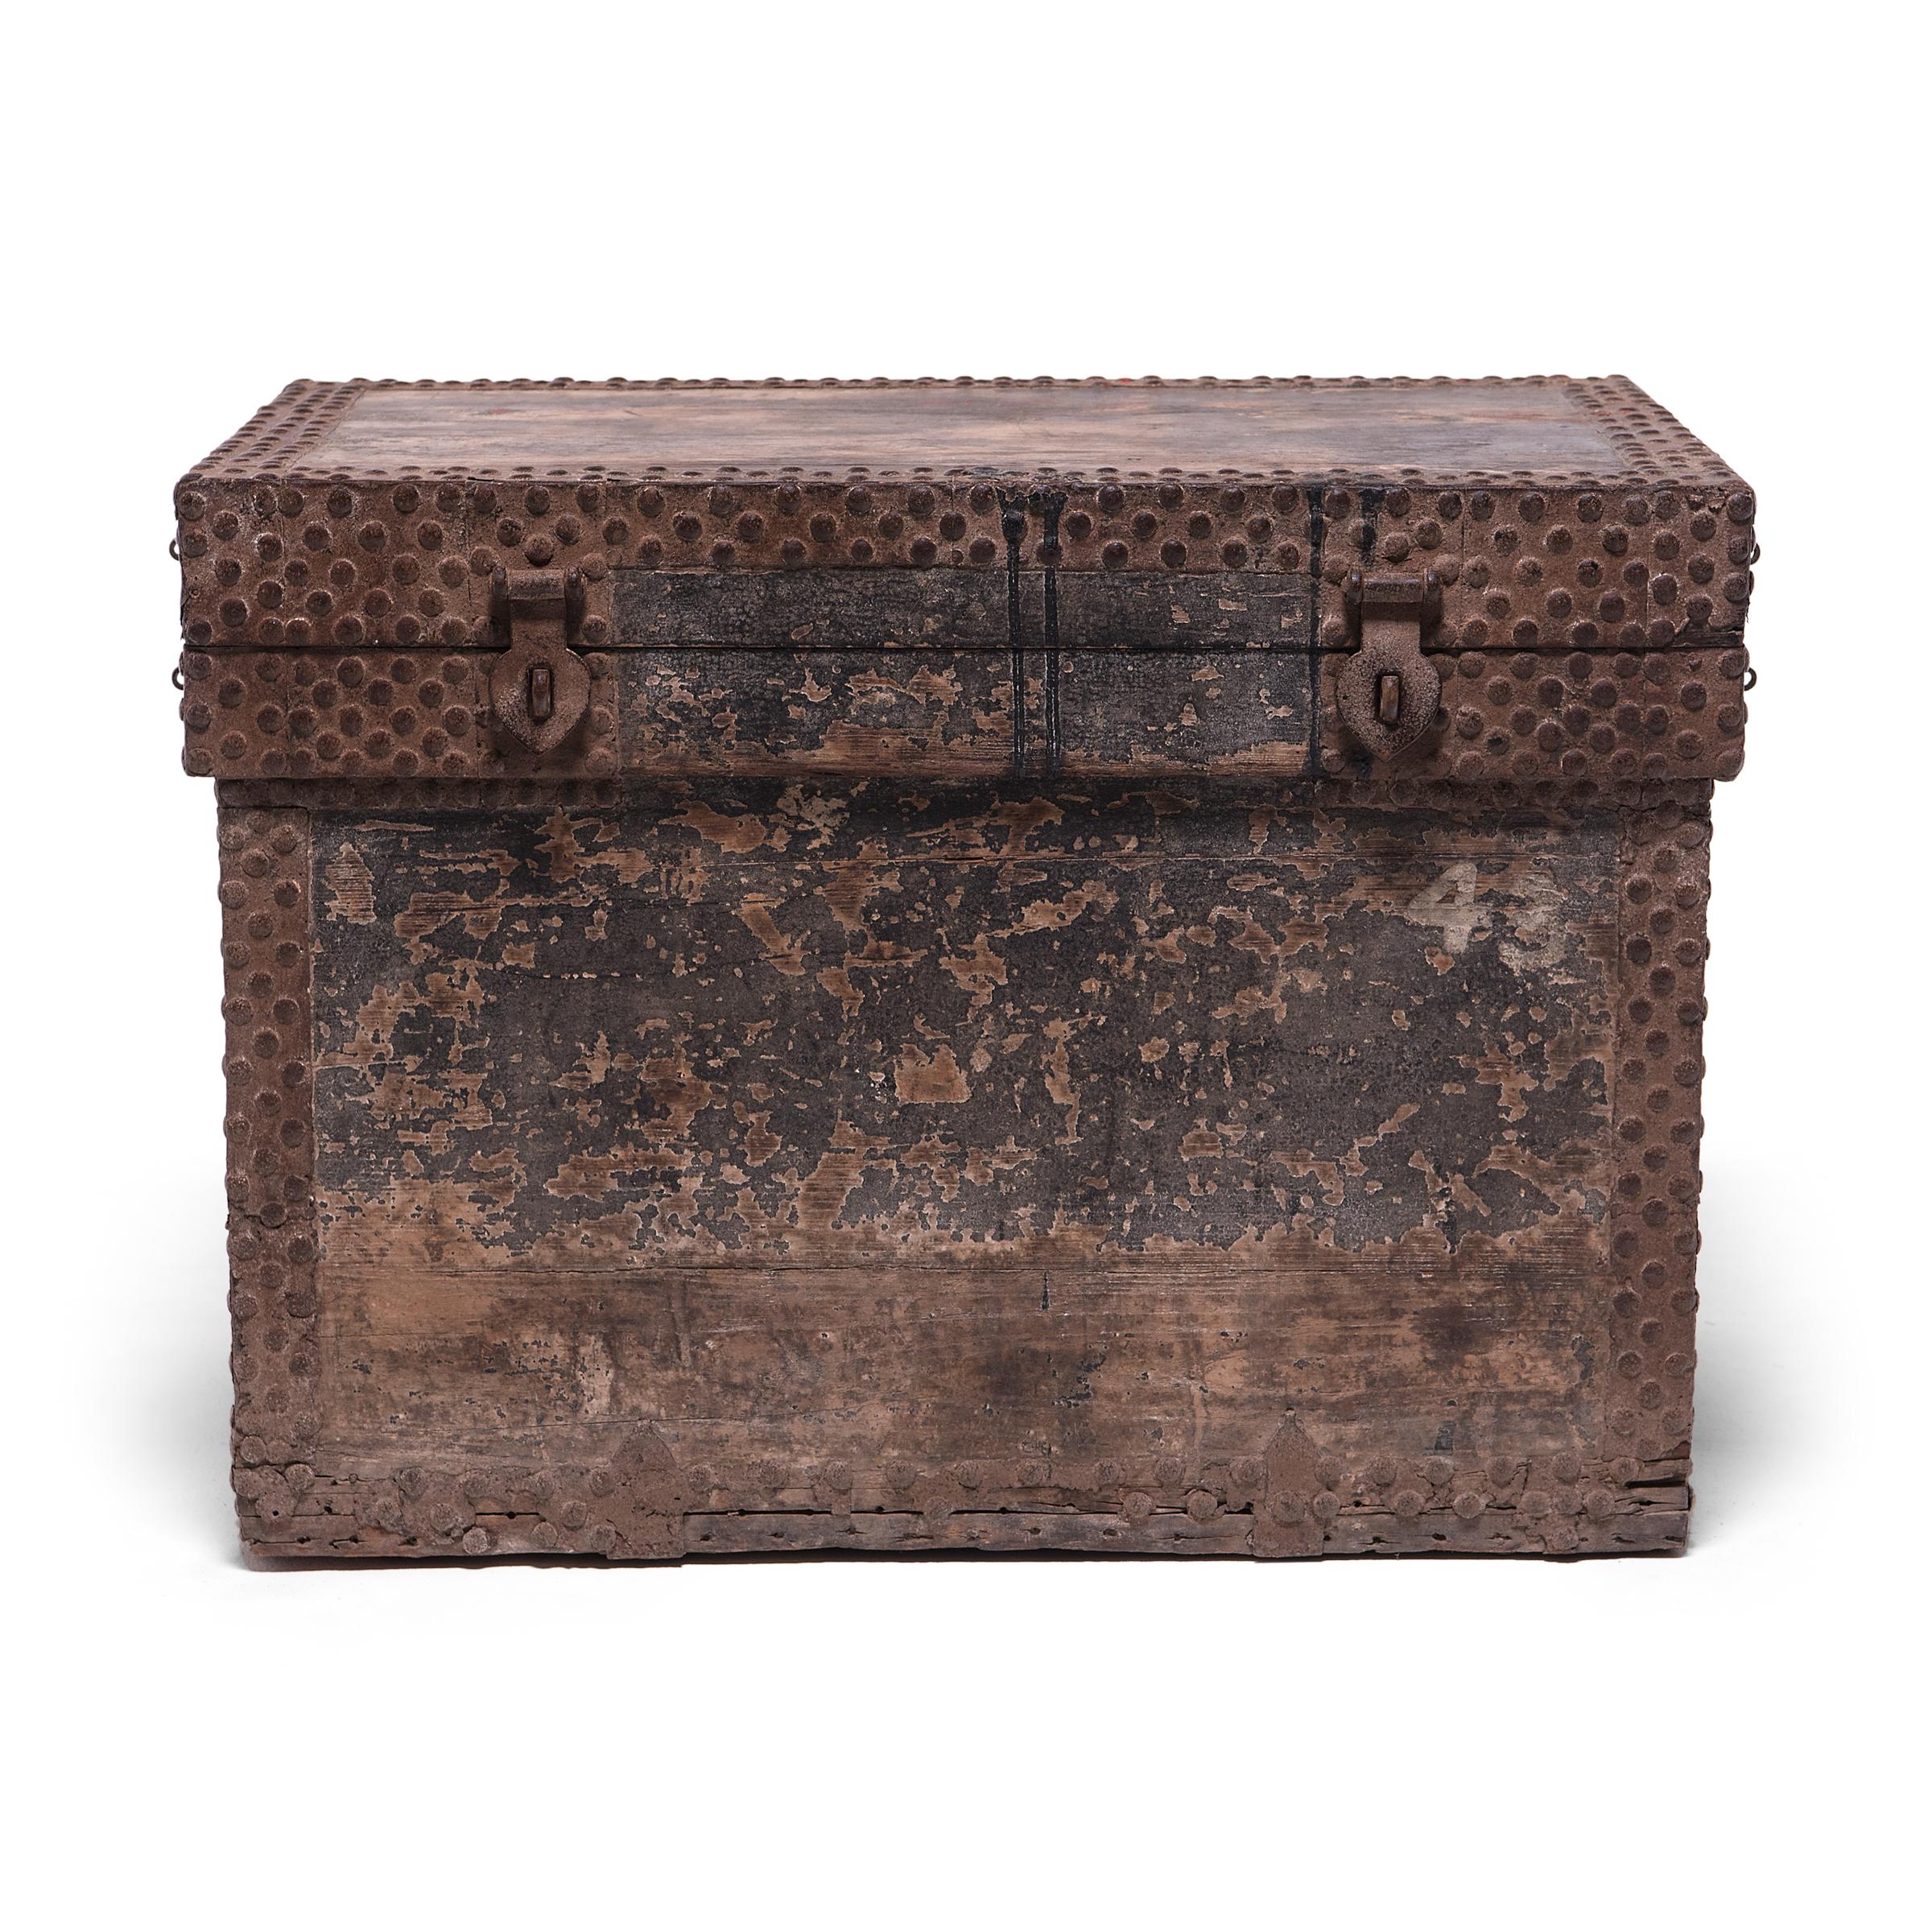 Studded with brass nails and textured by richly worn black lacquer, this spectacular trunk dates to the late Ming dynasty and would have been used by a wealthy family or merchant to transport money or precious goods. The subdued, neutral exterior